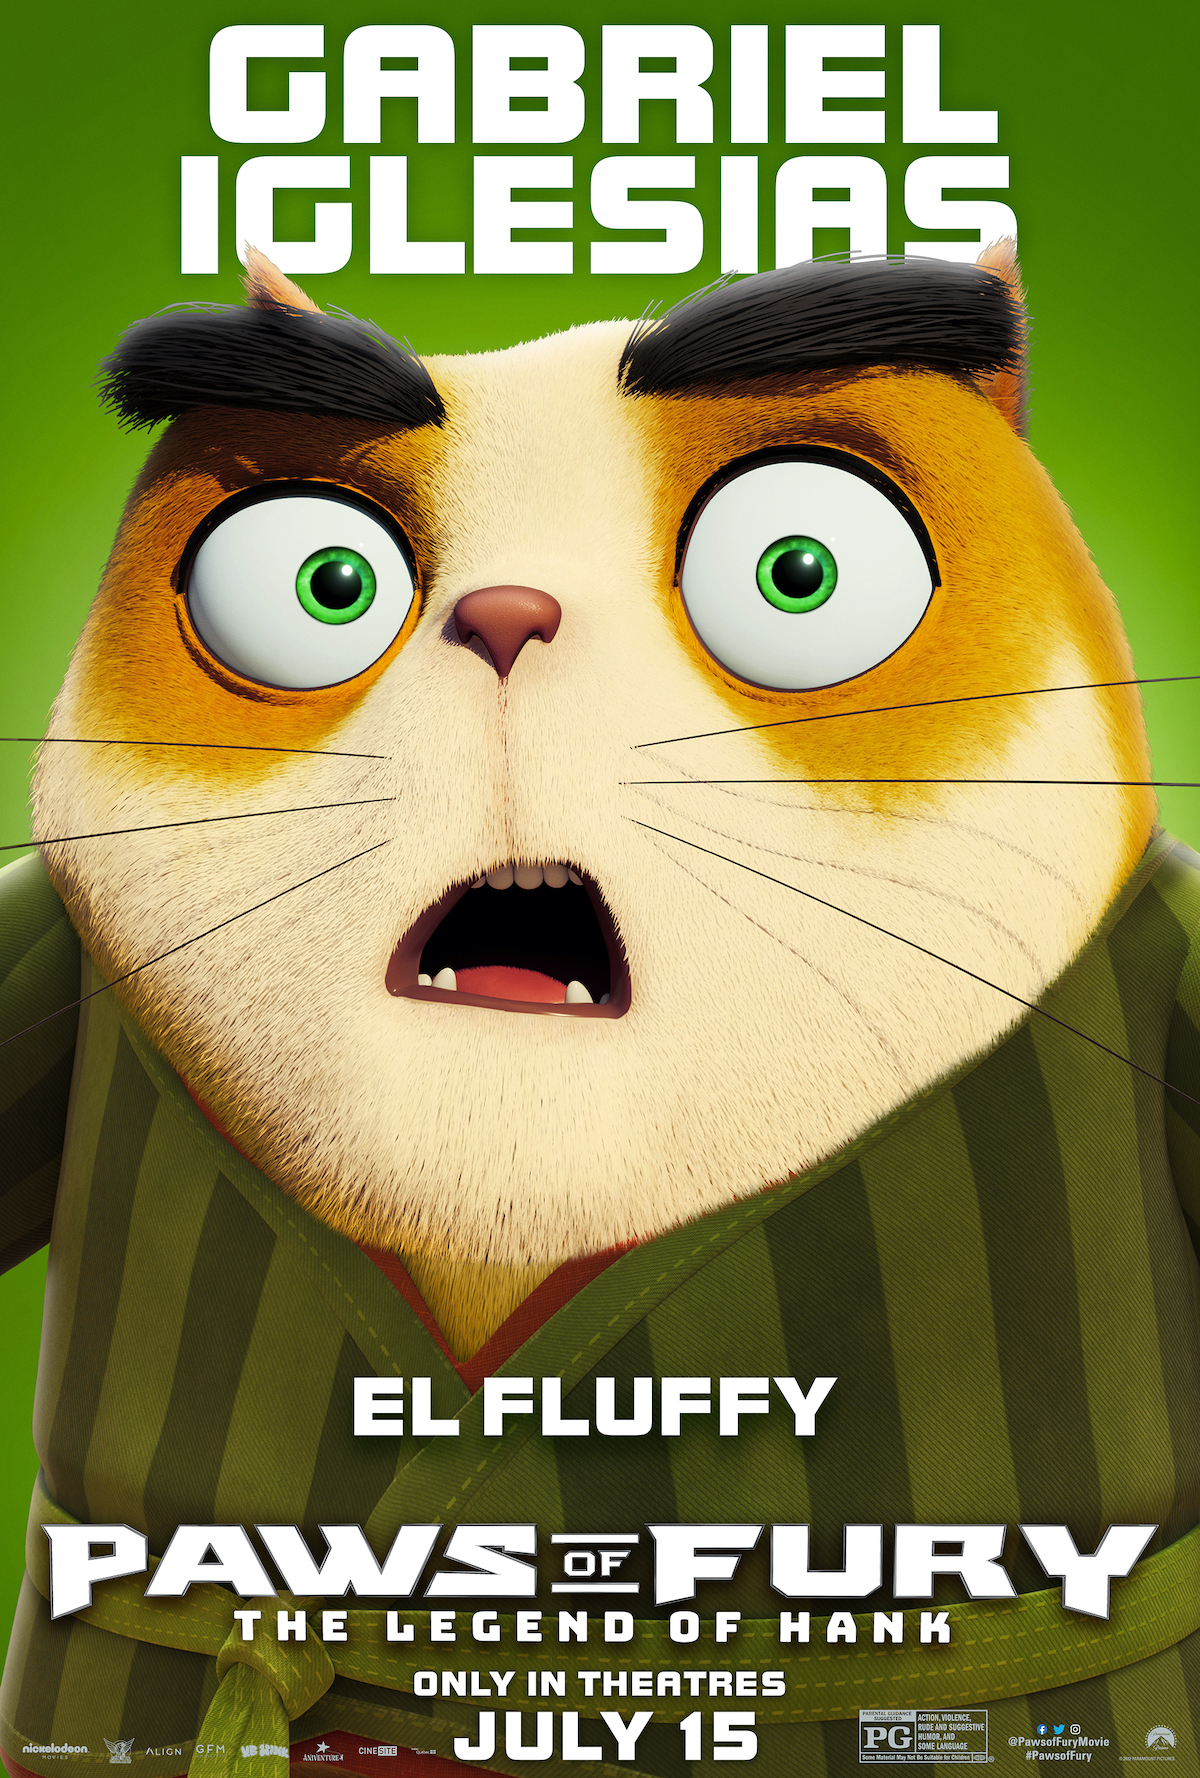 Paws of Fury - Gabriel Iglesias character poster